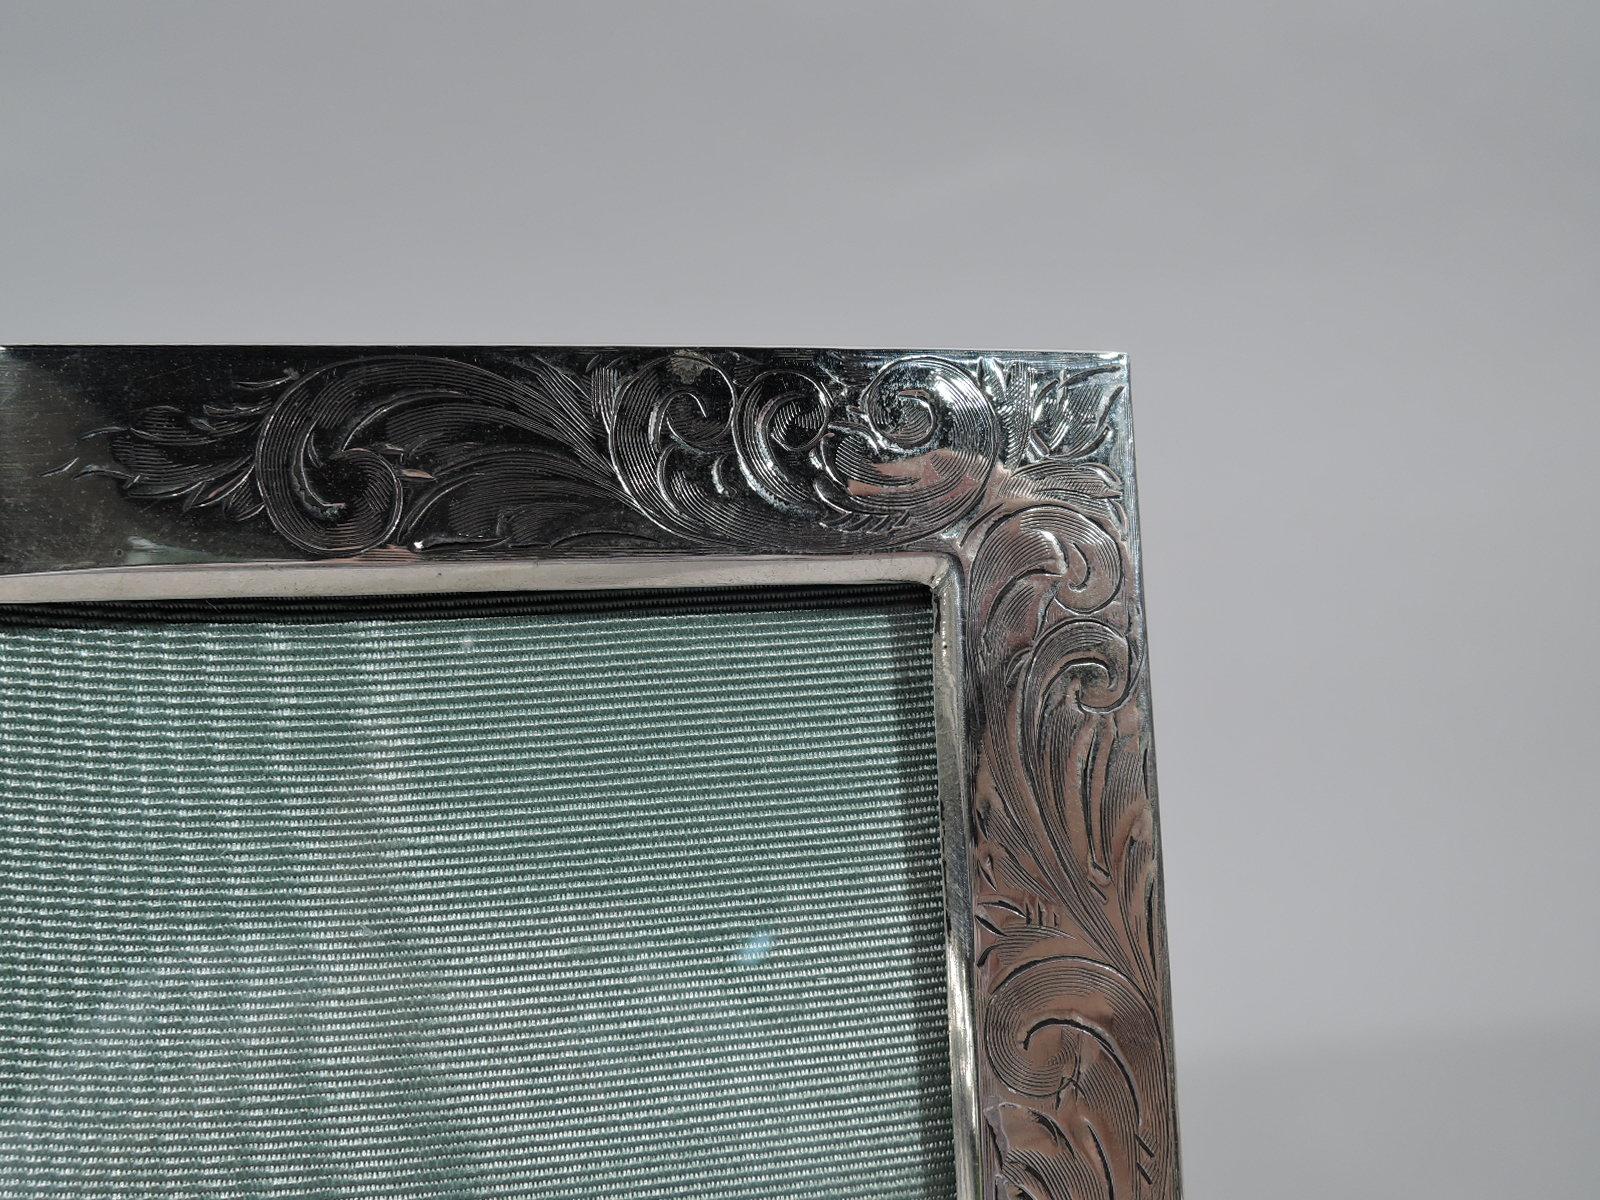 Edwardian Art Nouveau sterling silver picture frame, ca 1910. Rectangular window in flat surround with densely engraved scrolls and flowers; sides plain. Top rail center vacant. With glass, silk lining, and velvet back and hinged easel support for